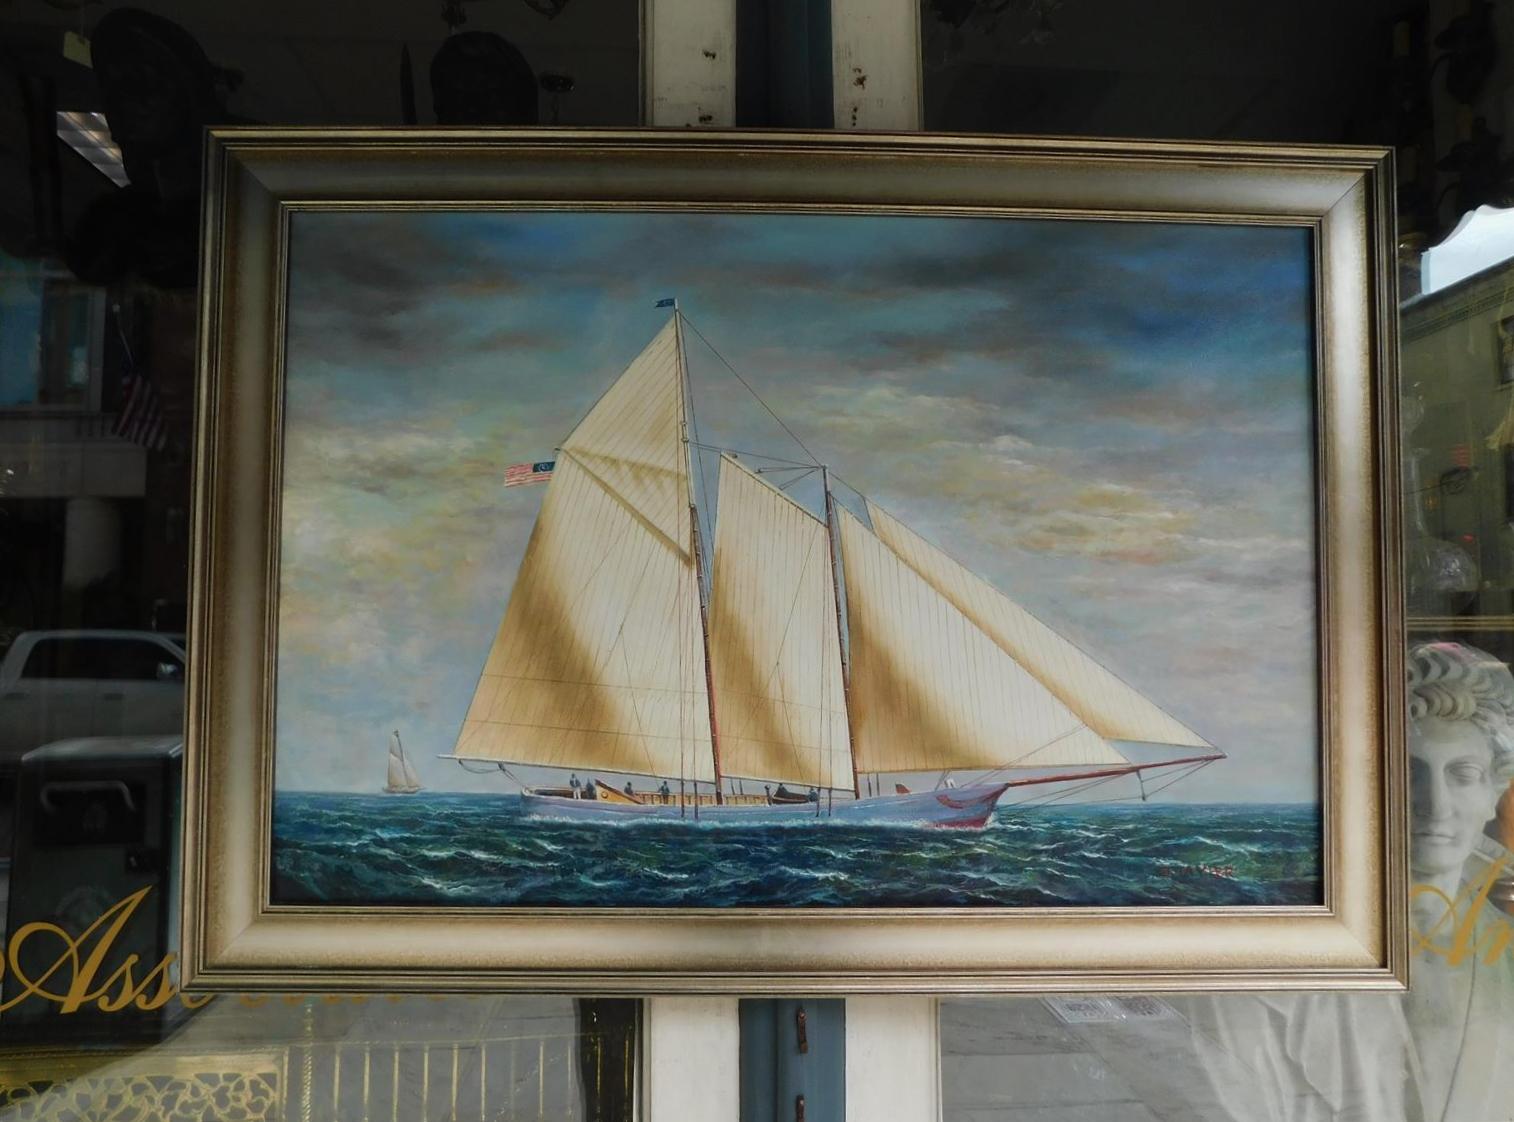 American nautical oil on canvas of two masted schooner yacht under full sail with American flag, crew on deck, second vessel in distance, and mounted in a silver gilt frame, Early 20th century. Signed D. Tayler.
 